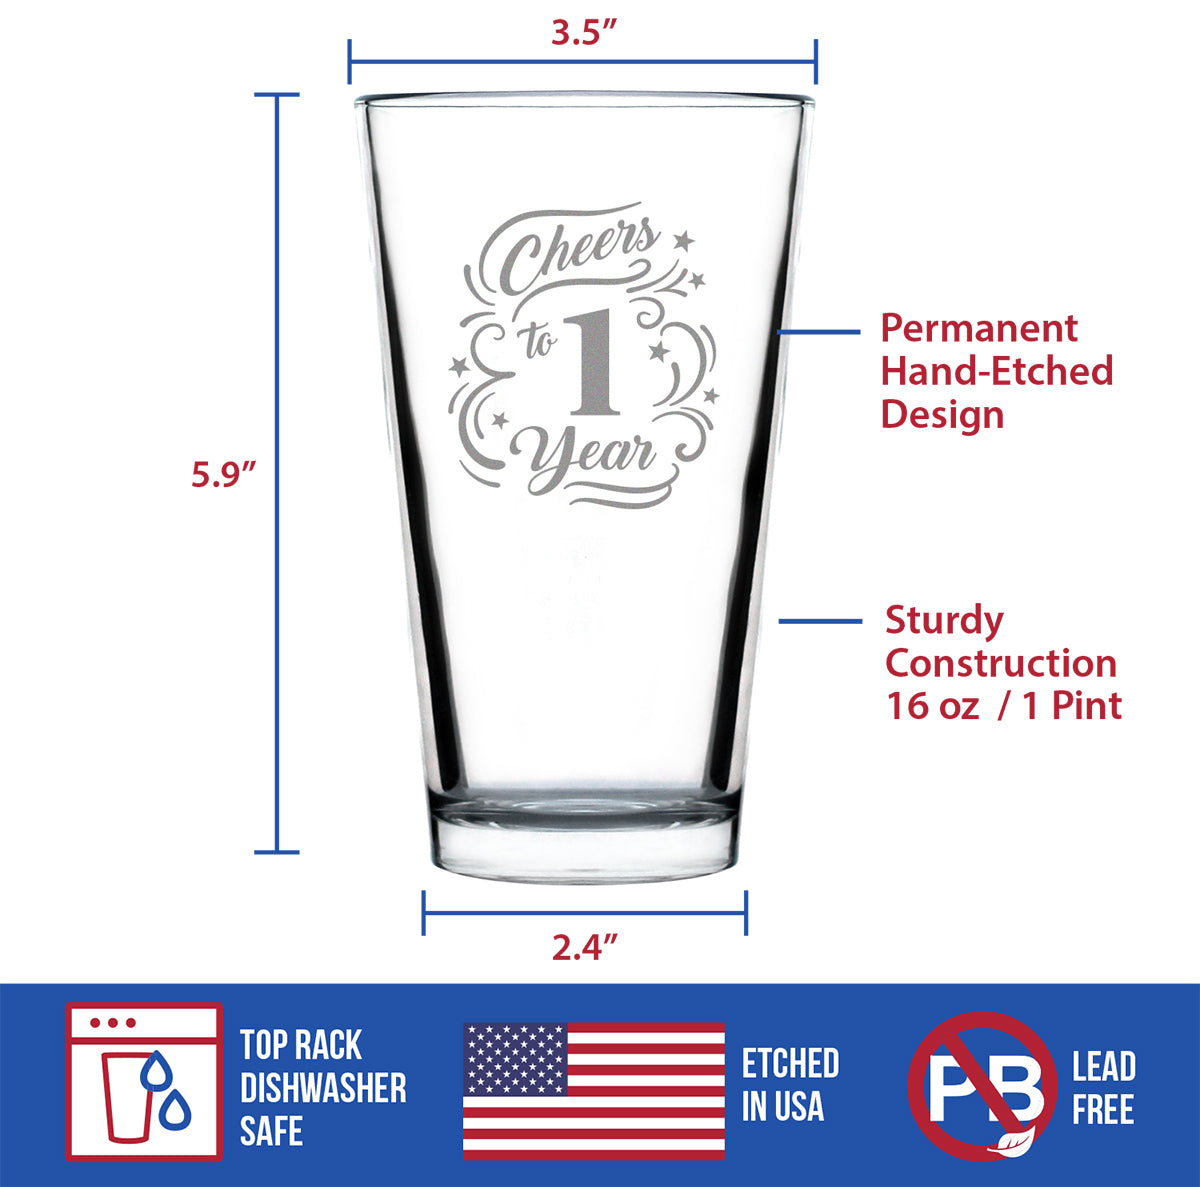 Cheers to 1 Year - Pint Glass for Beer - Gifts for Women &amp; Men - 1st Anniversary Party Decor - 16 Oz Glasses